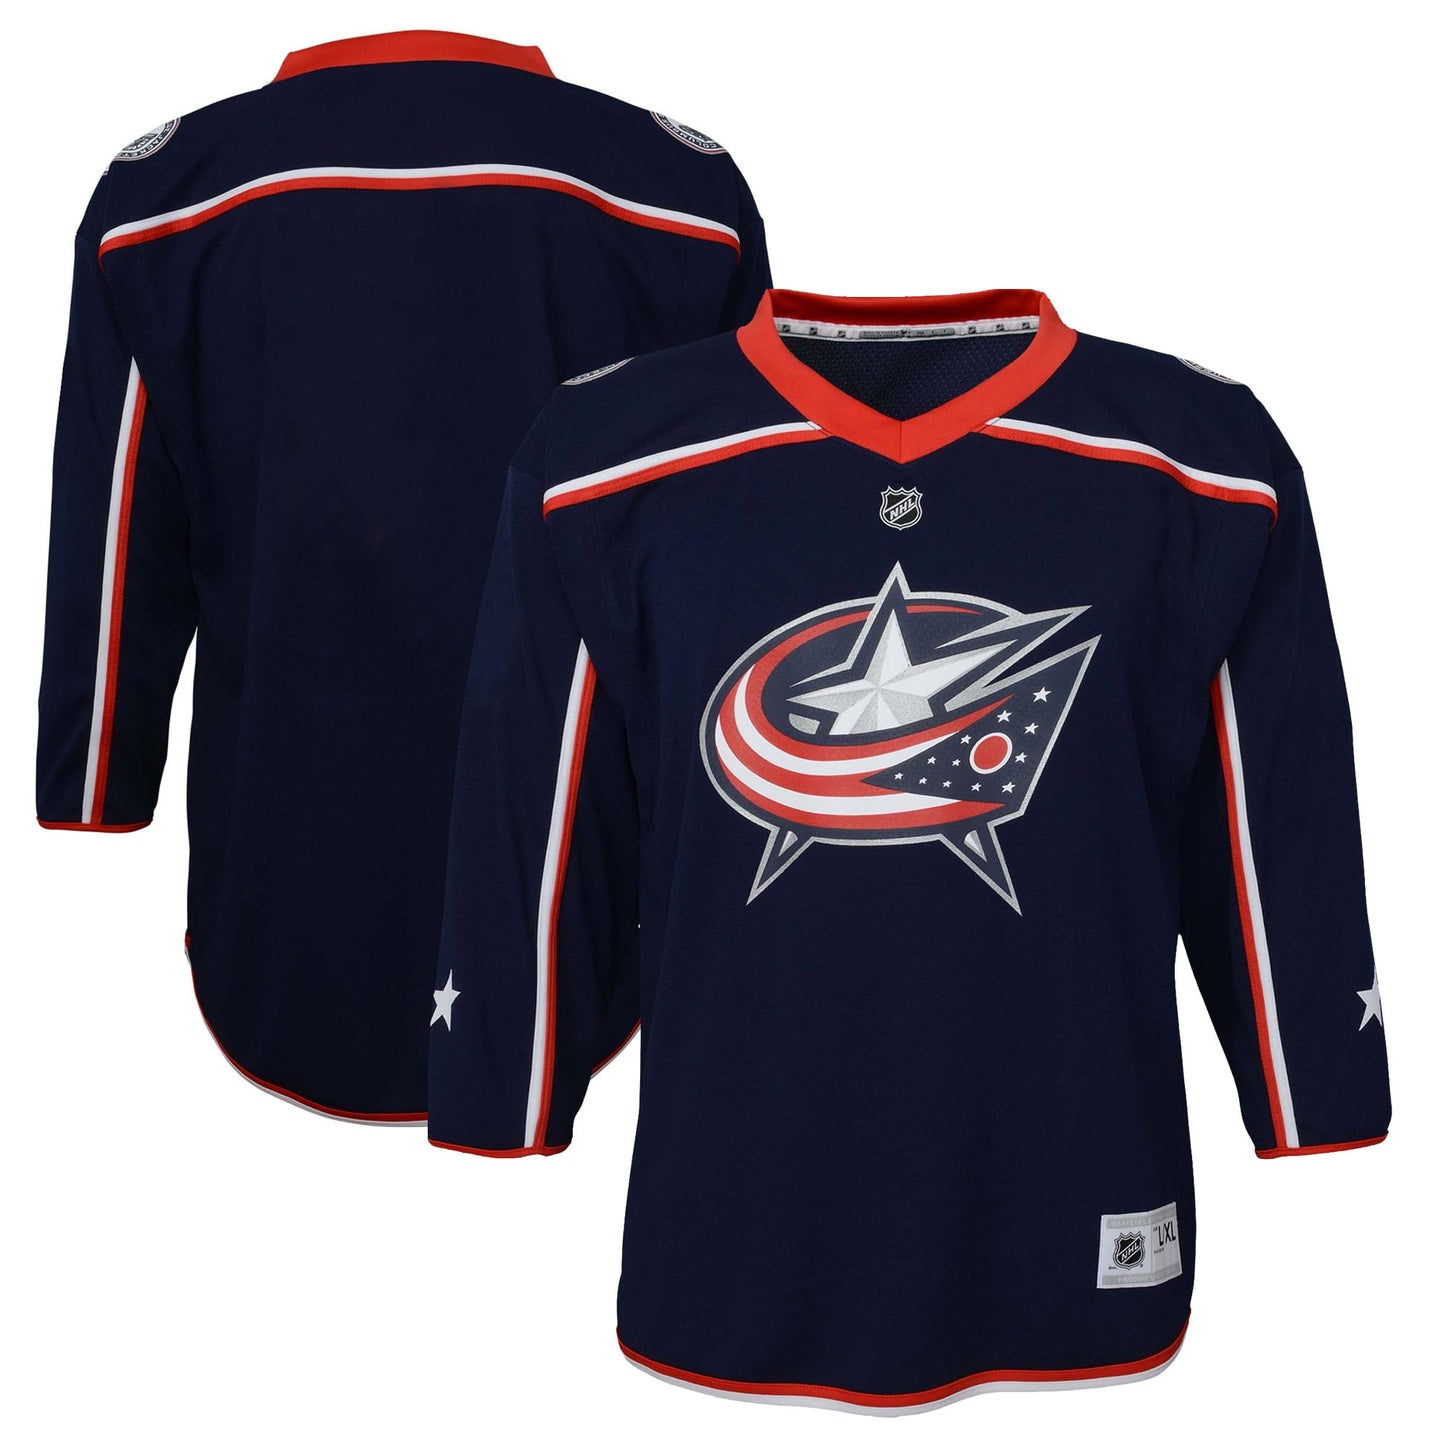 Infant Navy Columbus Blue Jackets Home Replica Blank Jersey